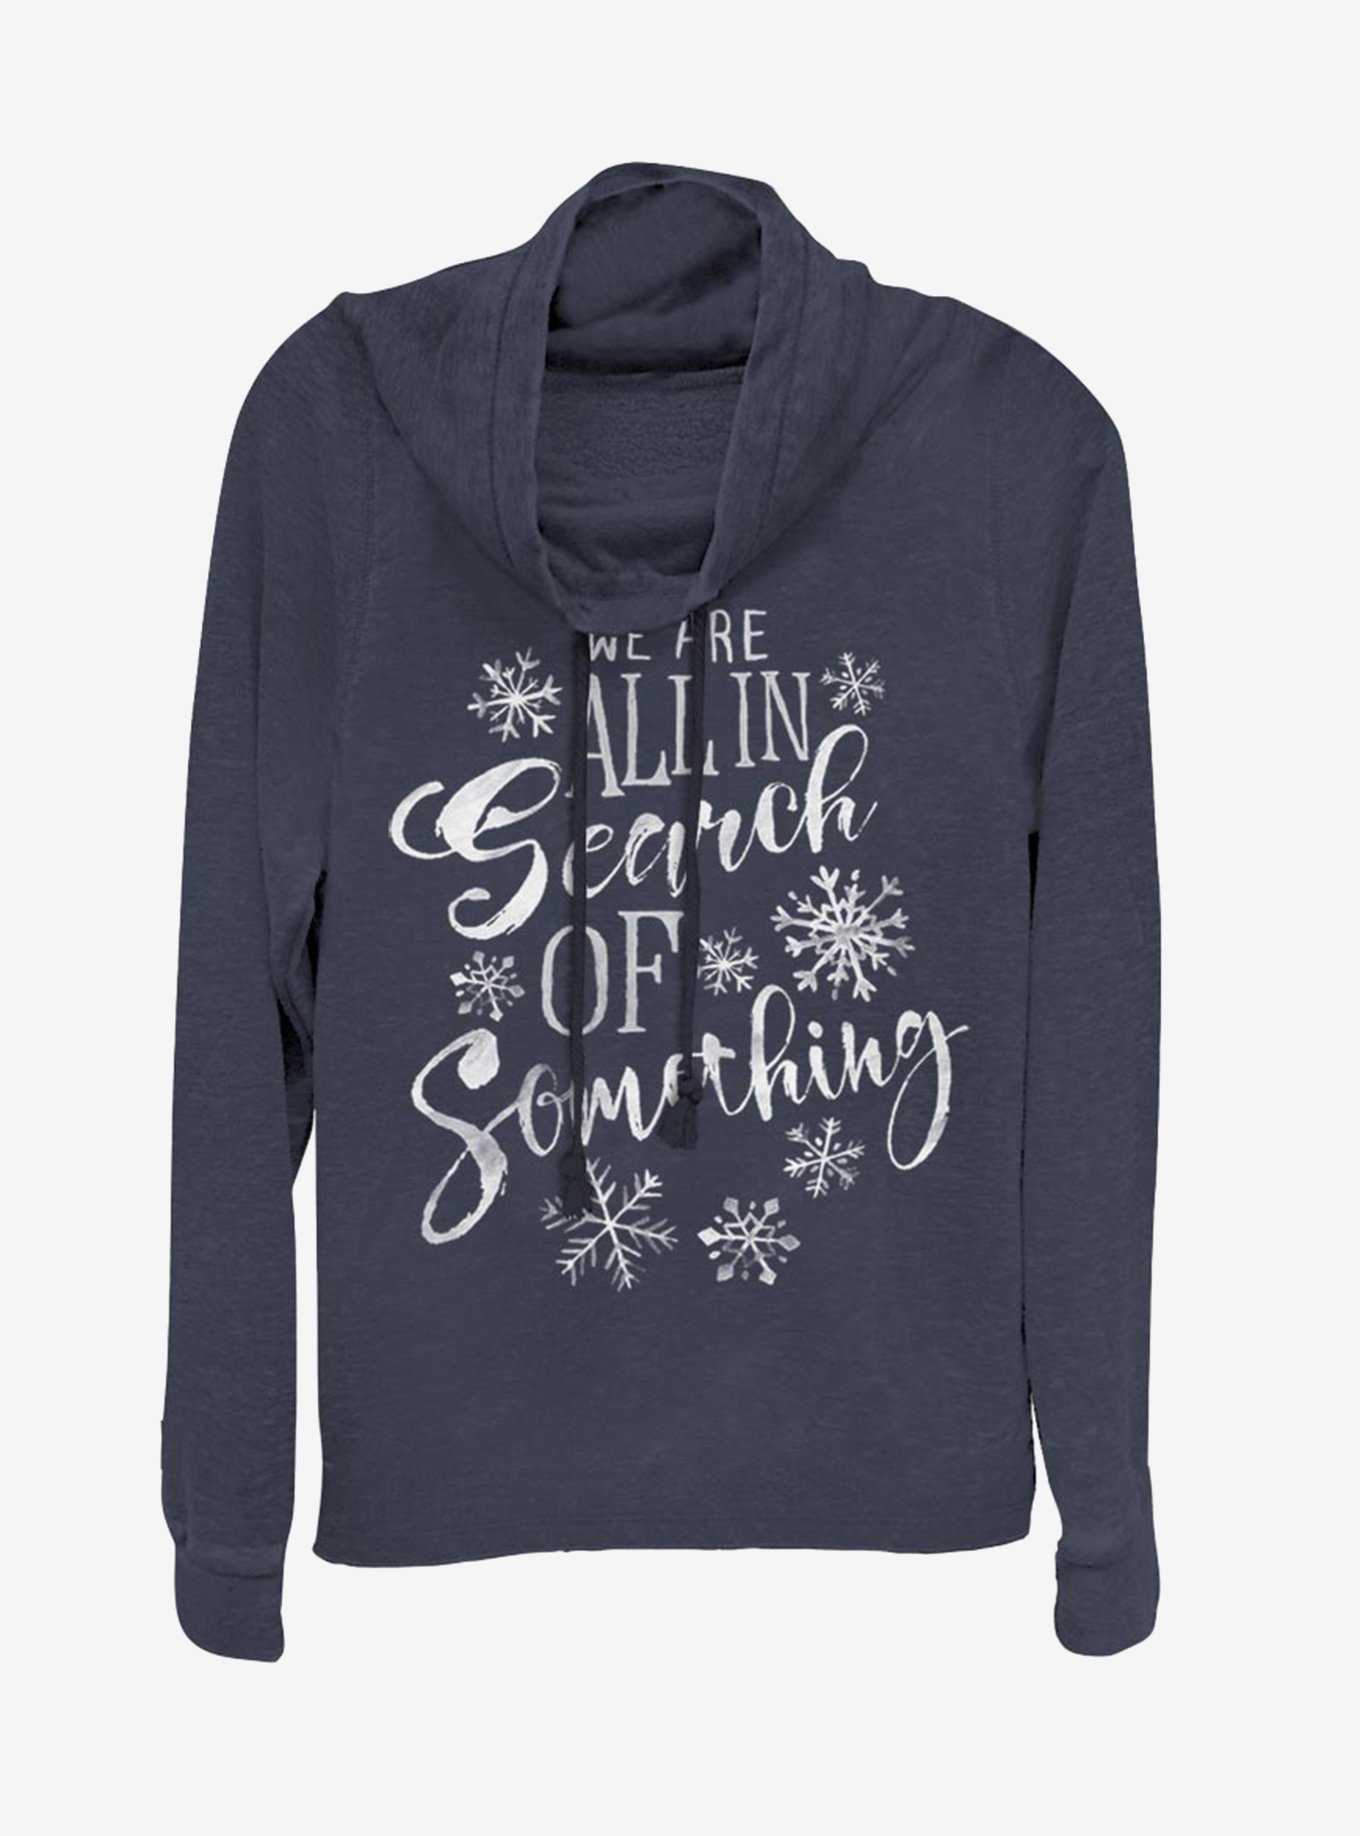 Disney Frozen 2 In Search Of Something Cowl Neck Long-Sleeve Girls Top, , hi-res